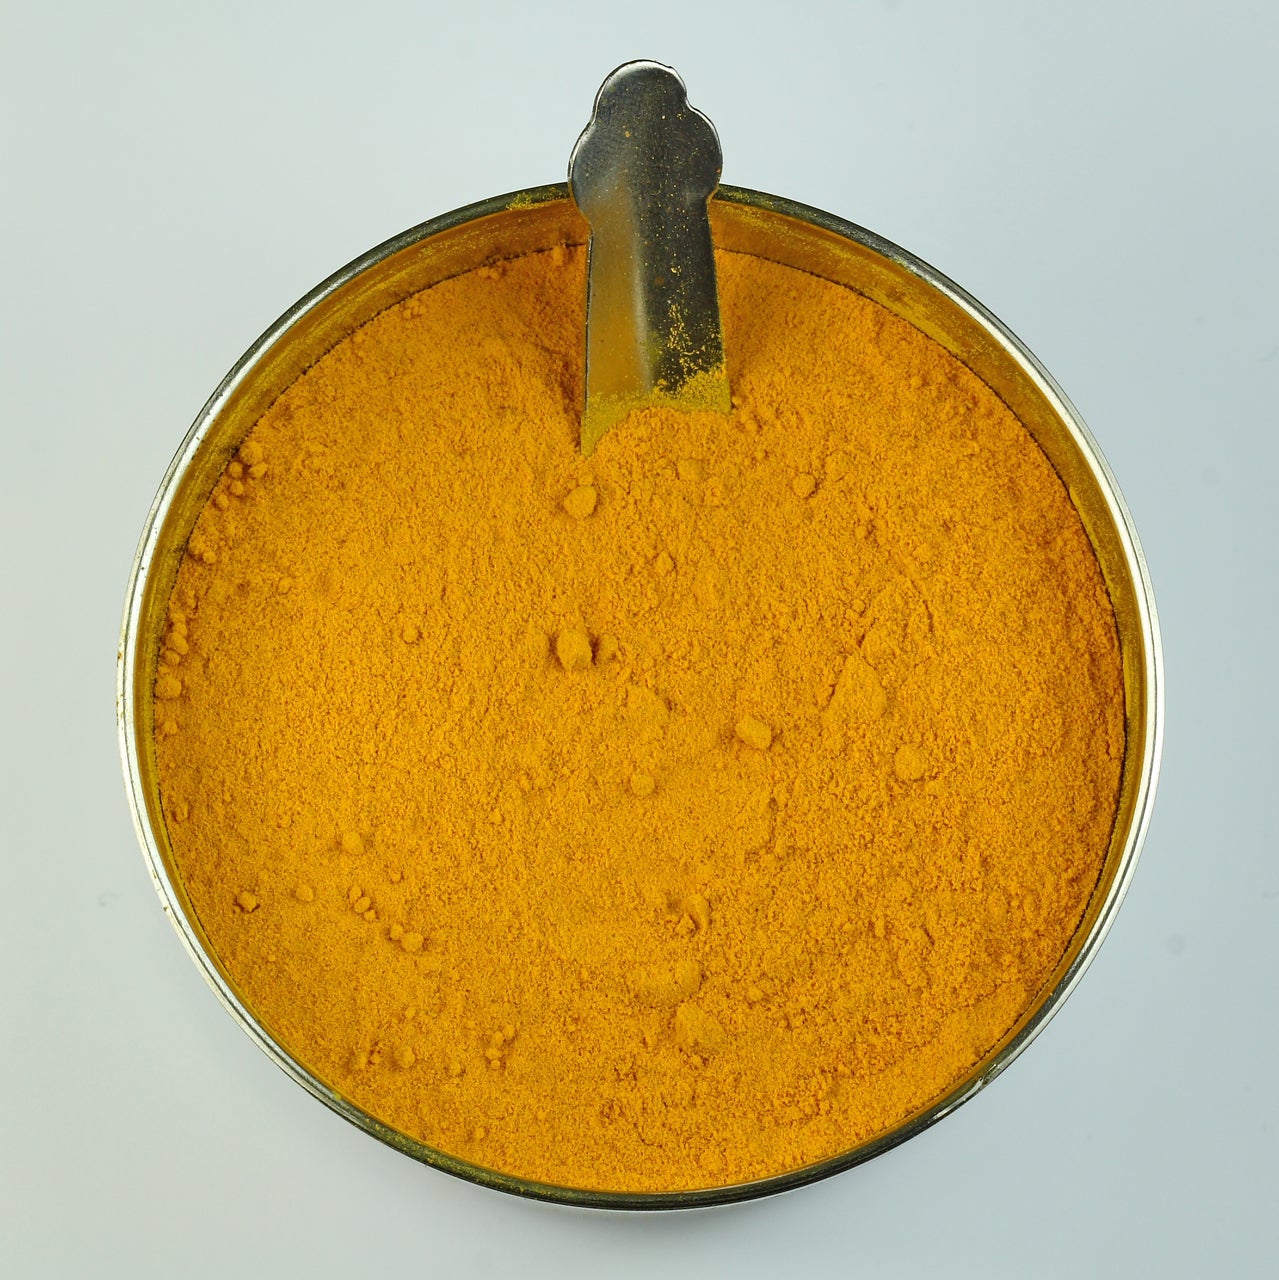 Turmeric Could Be Used to Detect Explosives, Researchers Say